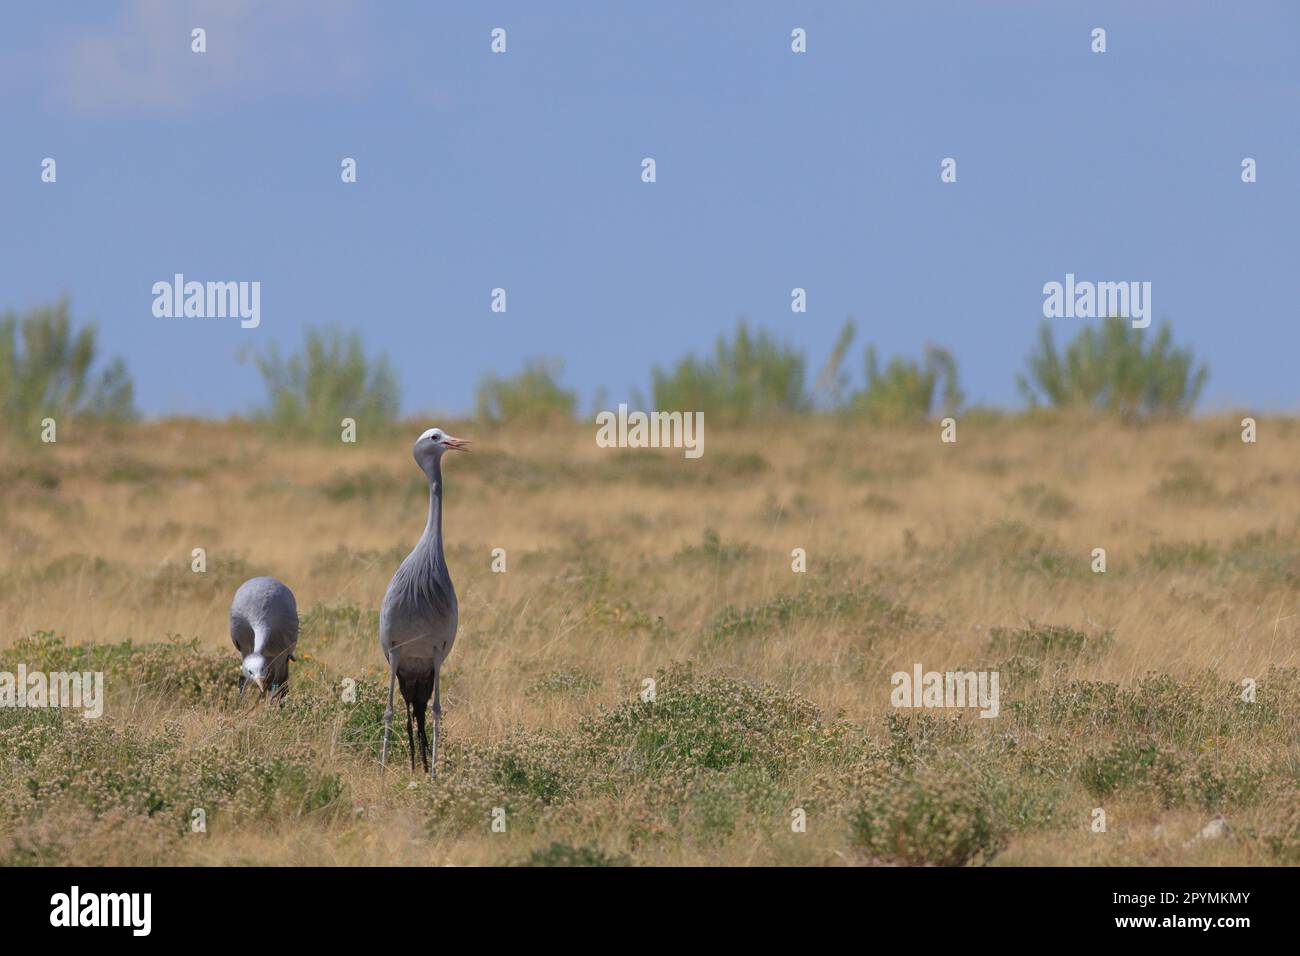 blue cranes in the wild of Etosha National Park in Namibia Stock Photo